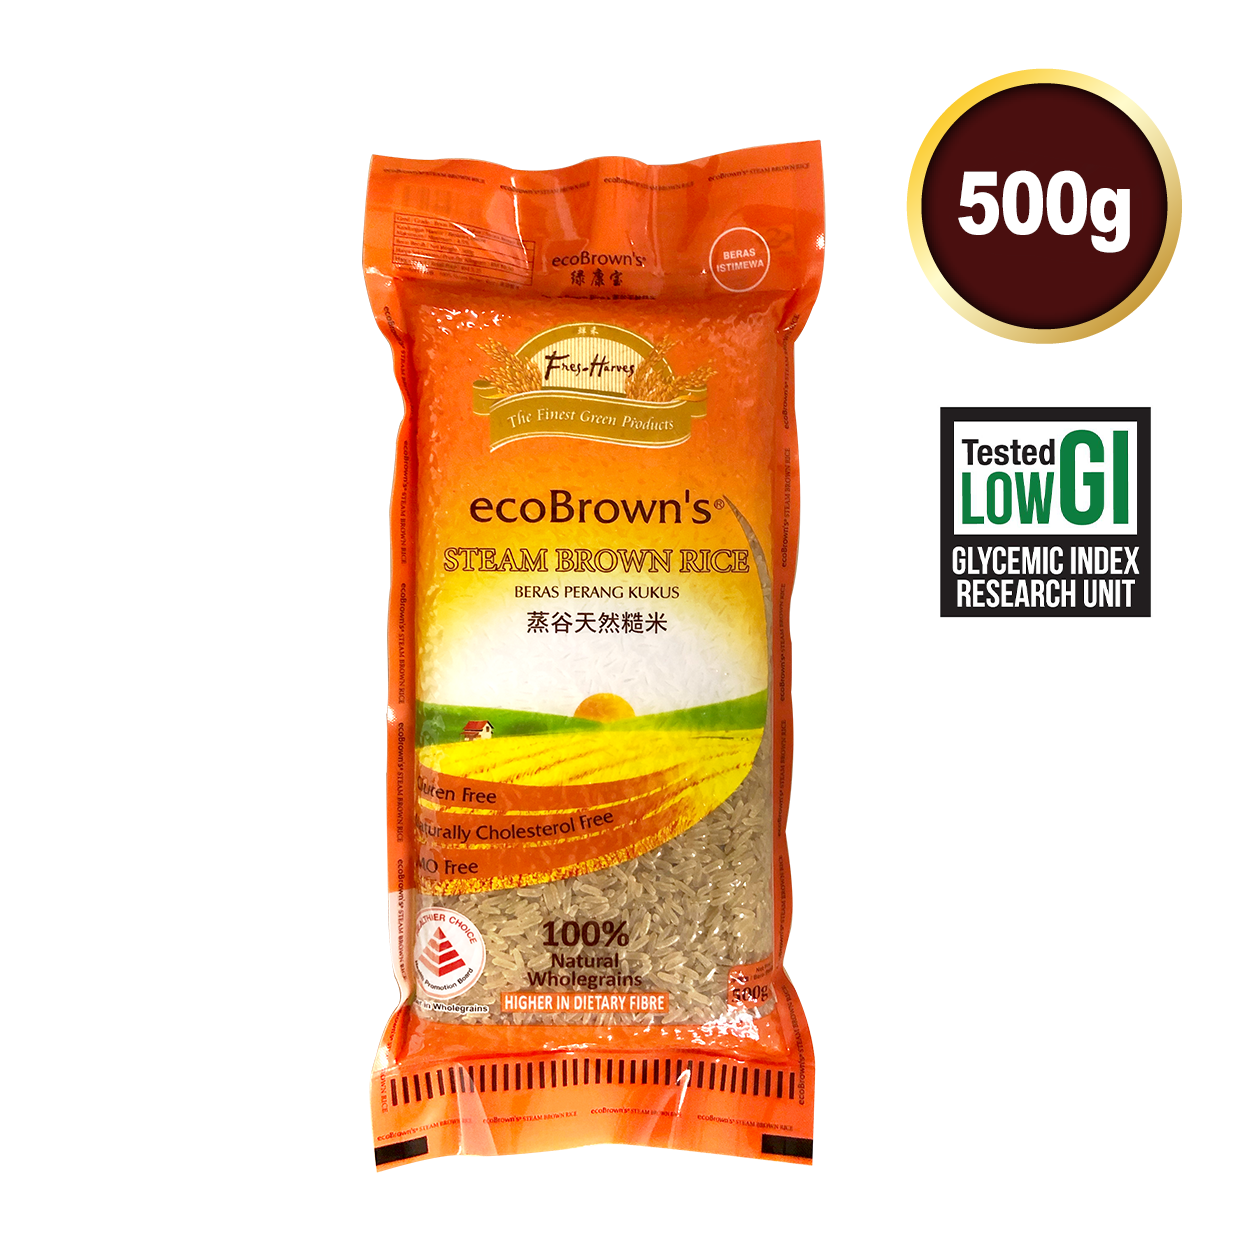 ecoBrown’s Steam Brown Rice 500g